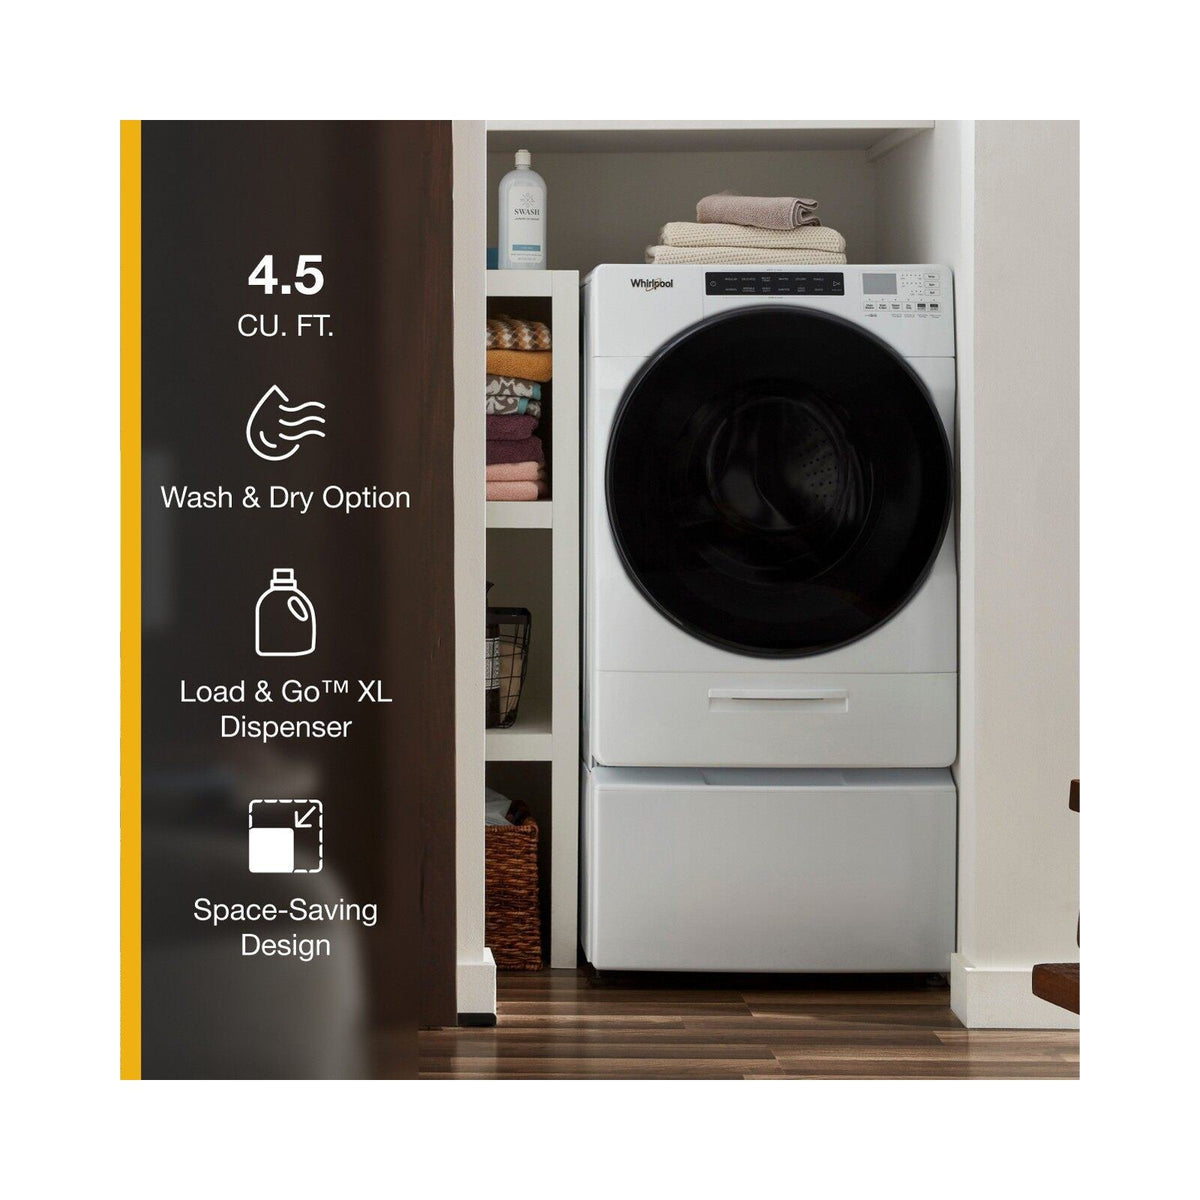 WHIRLPOOL WFC682CLW 4.5 Cu. Ft. Ventless All In One Washer Dryer